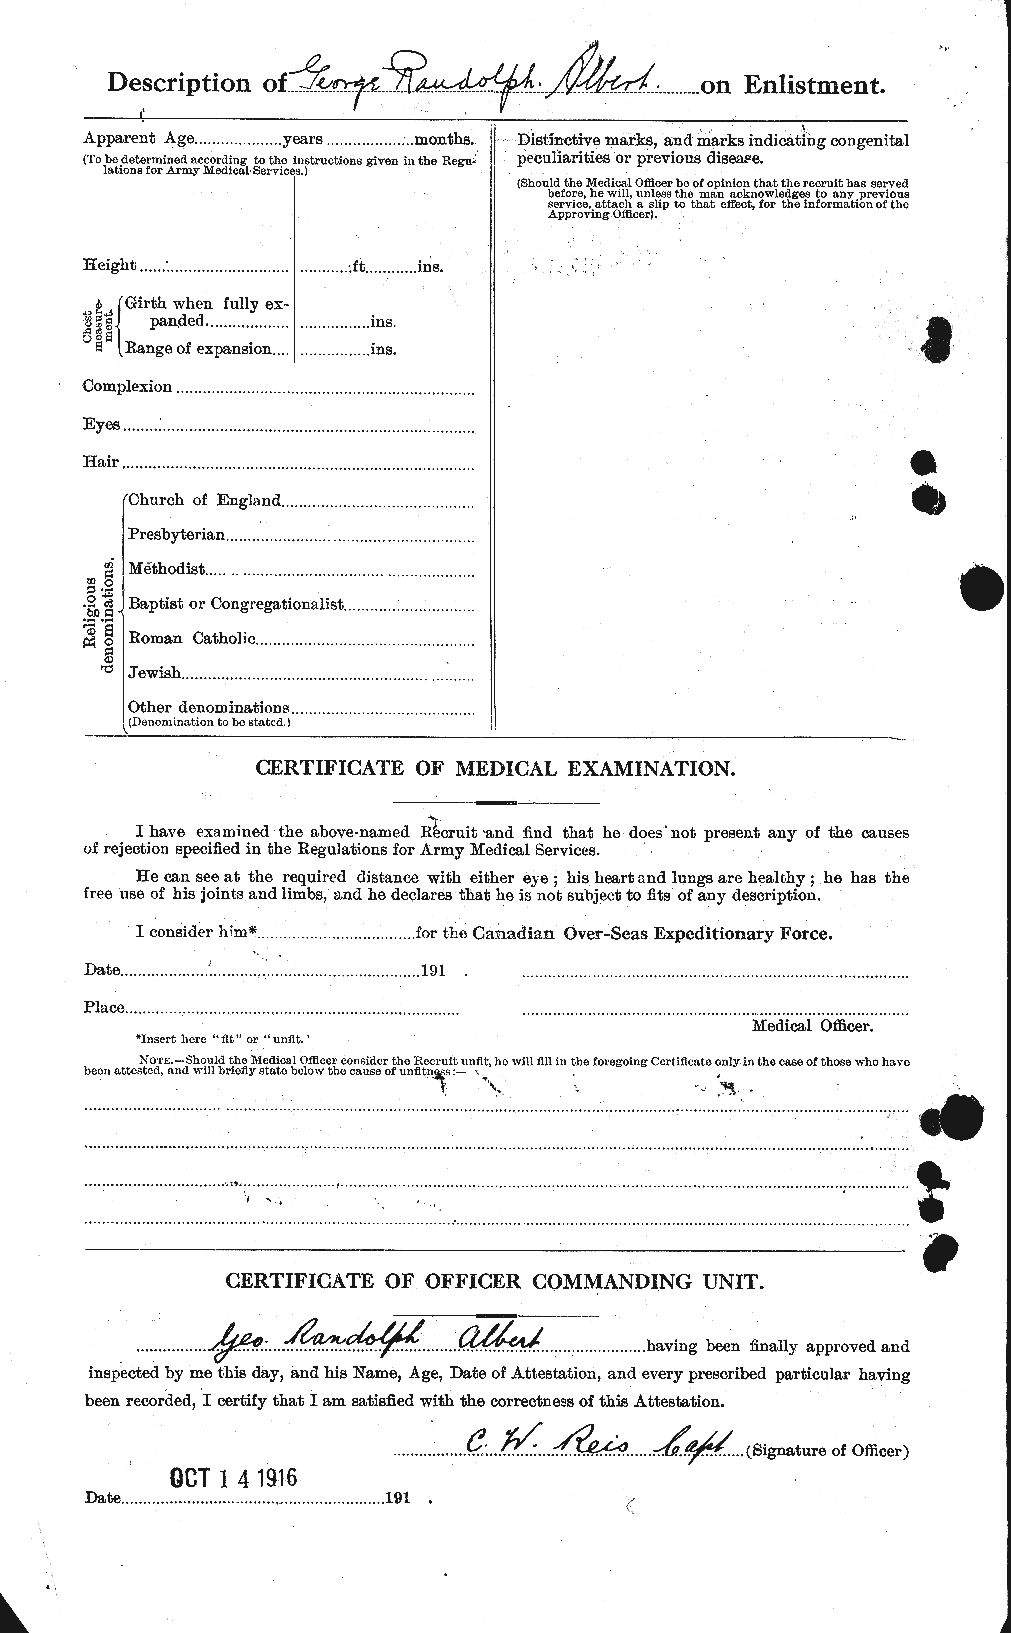 Personnel Records of the First World War - CEF 204589b